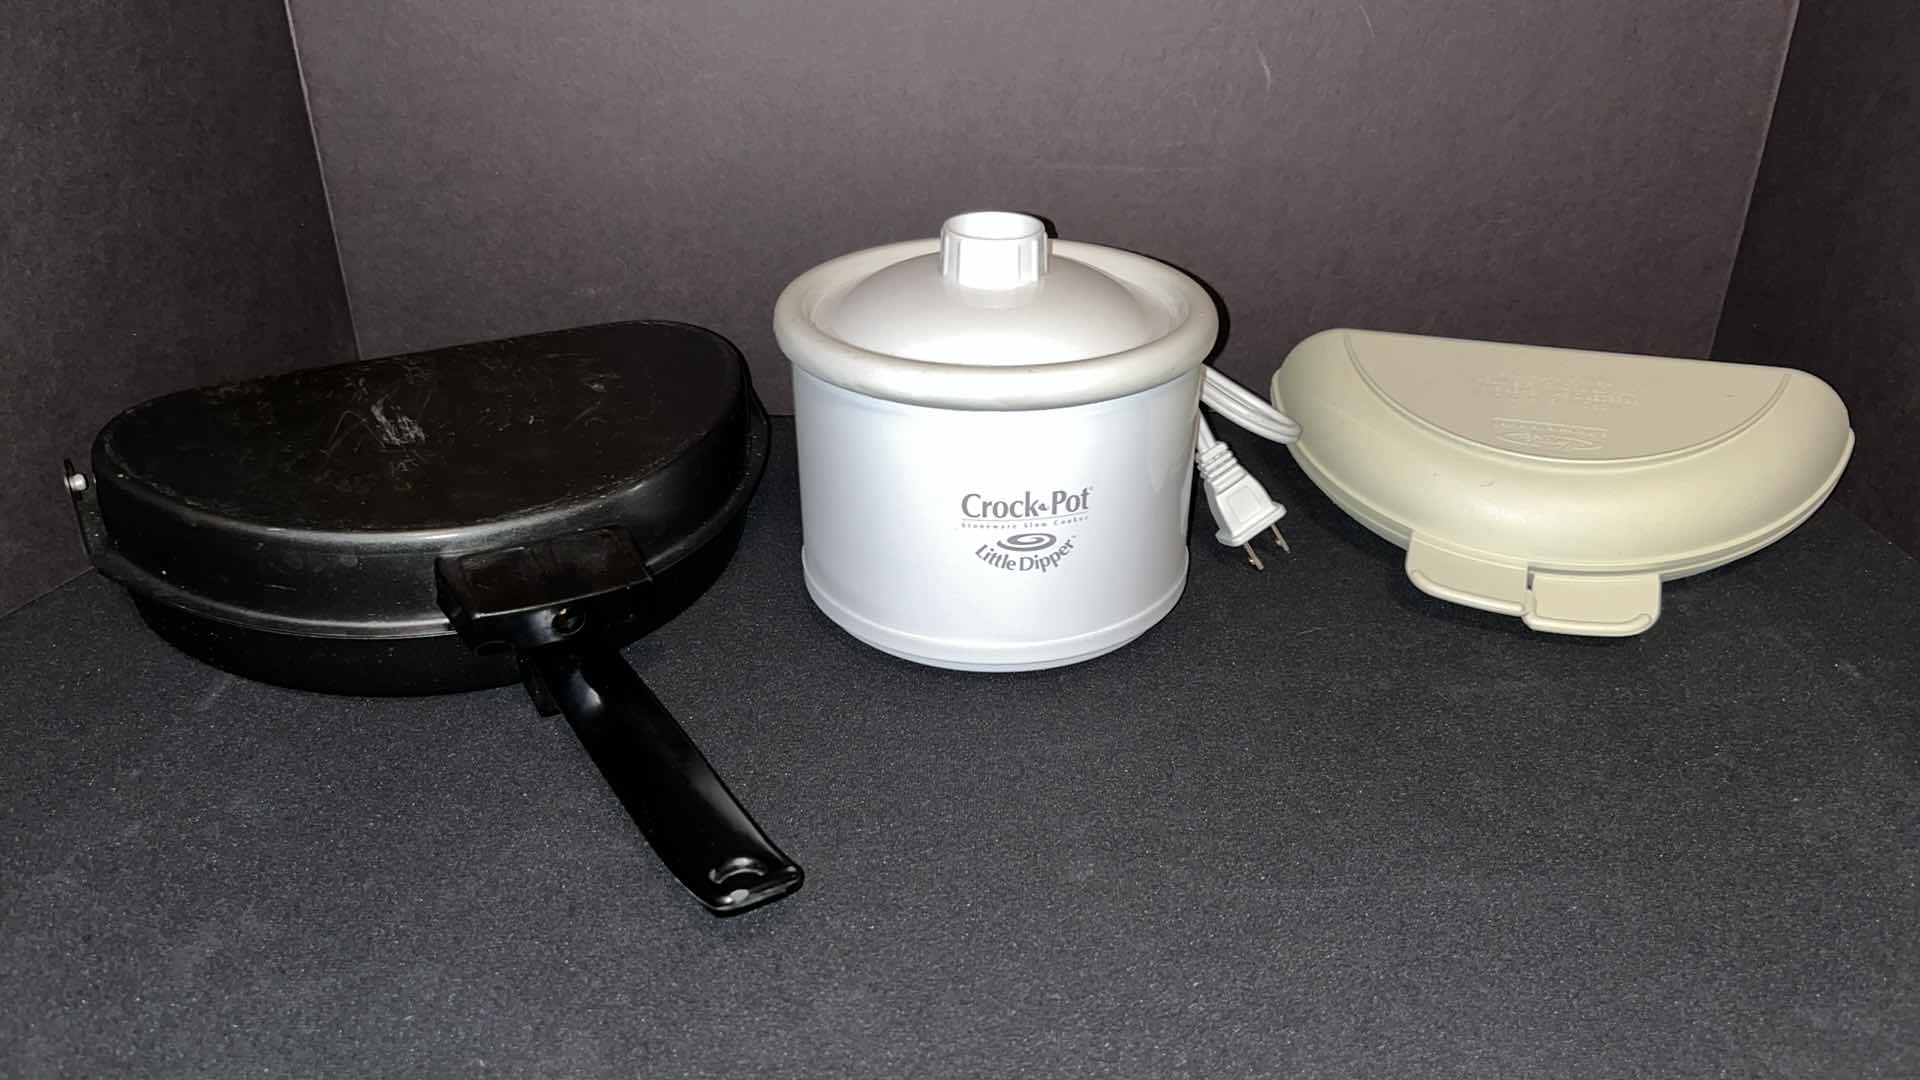 Photo 1 of NON-STICK FOLDING OMELETTE PAN DOUBLE SIDED COOKER, CROCK POT STONEWARE DLOW COOKER LITTLE DIPPER 4.5” (MODEL 32041) & MIRACLE WARE MICROWAVABLE OMELETTE COOKER